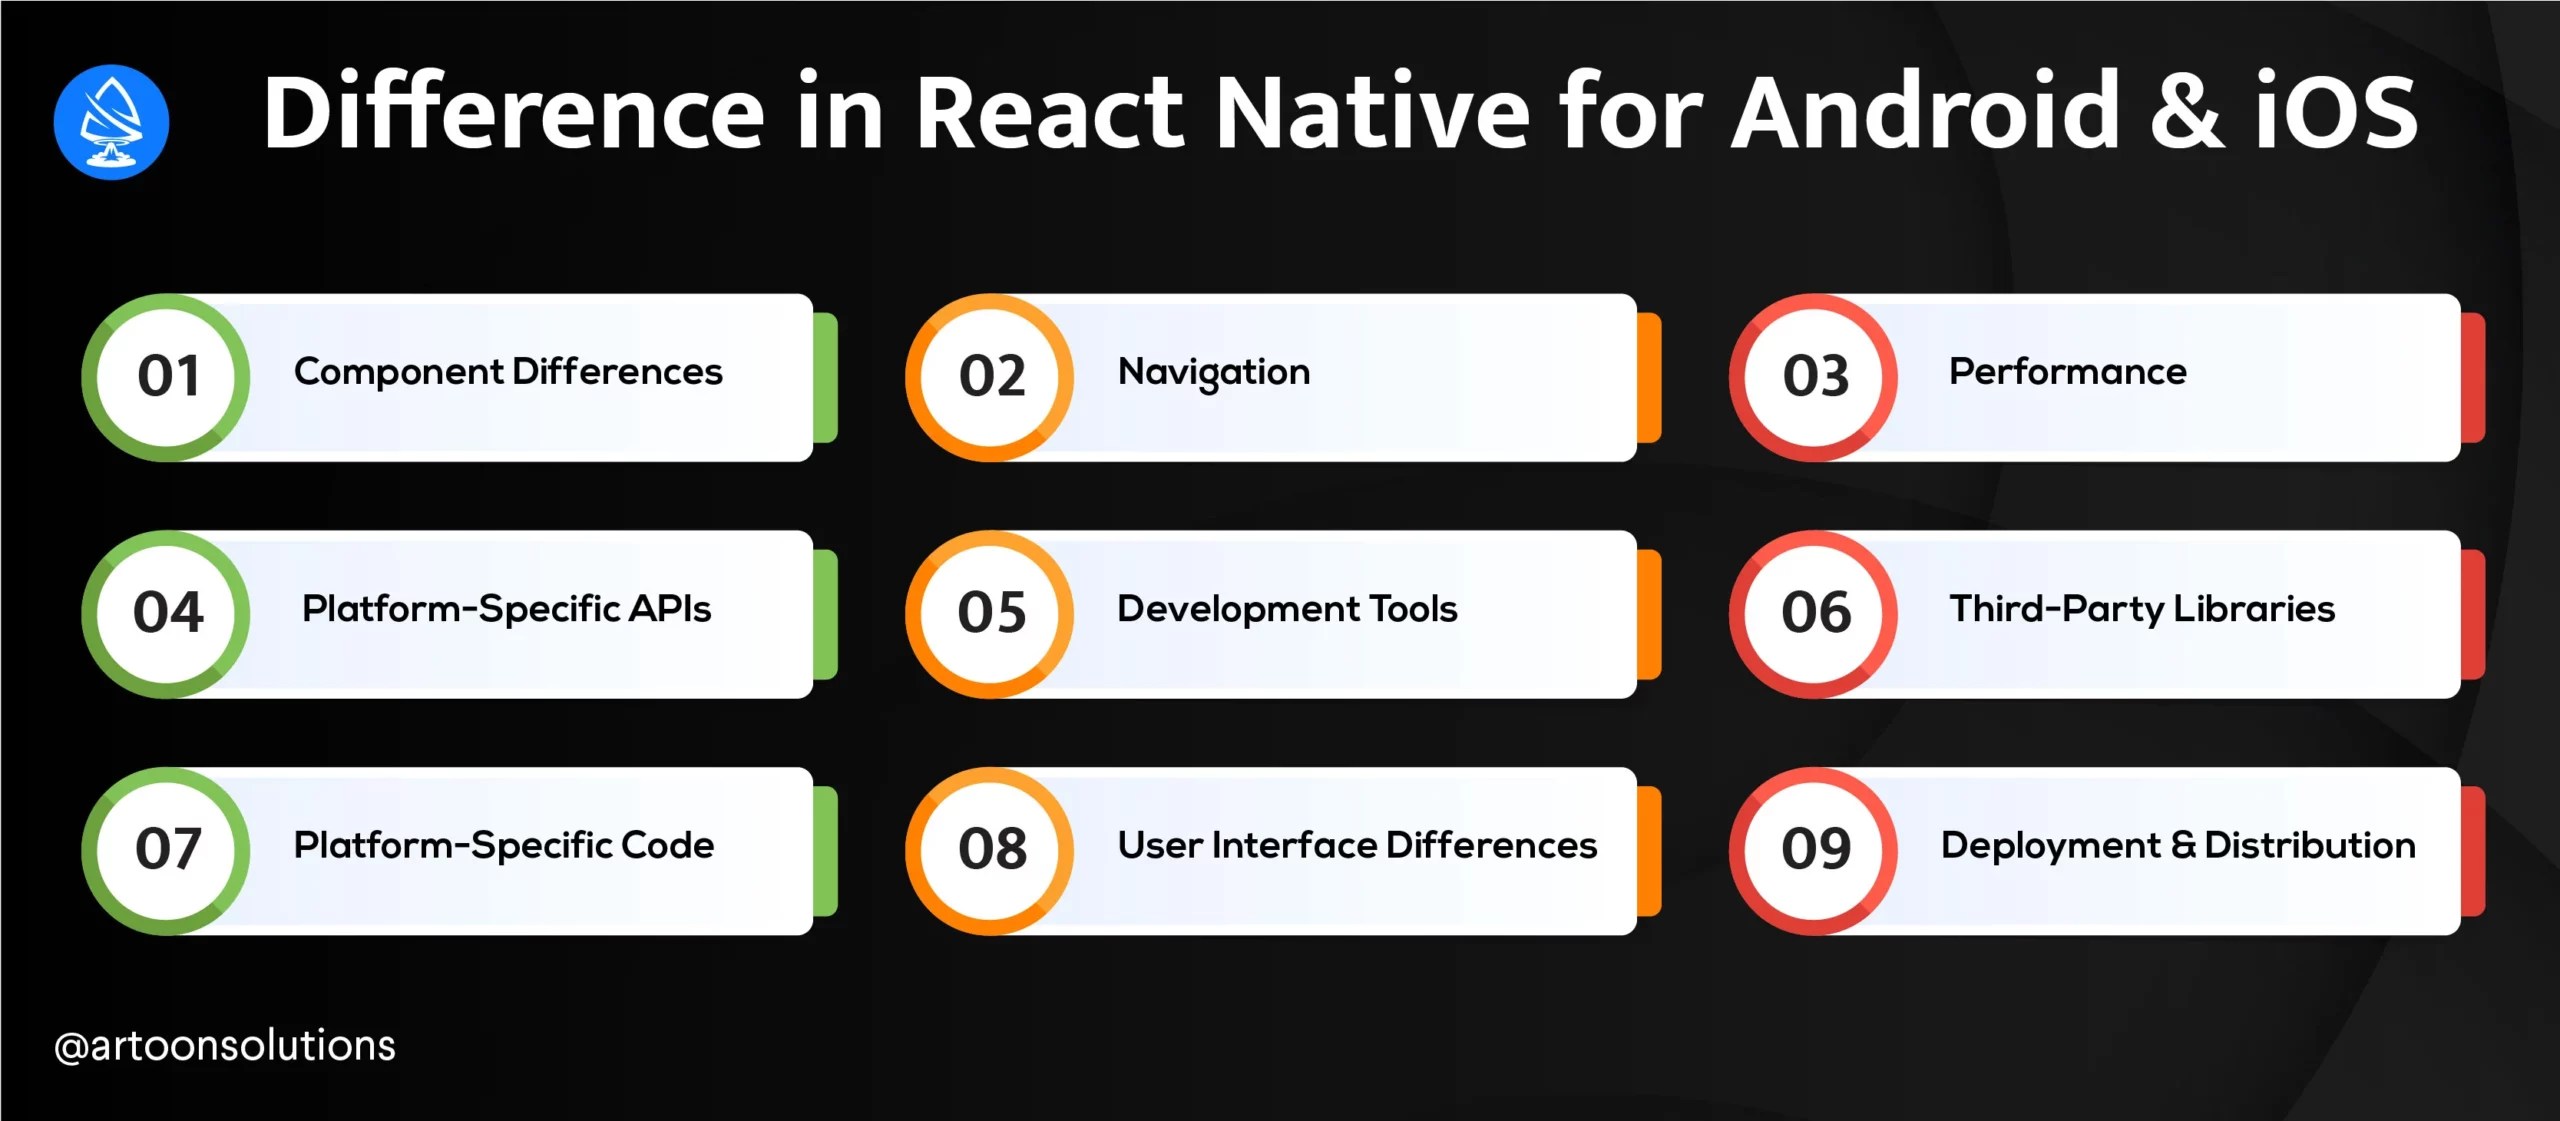 Difference in React Native for Android & iOS